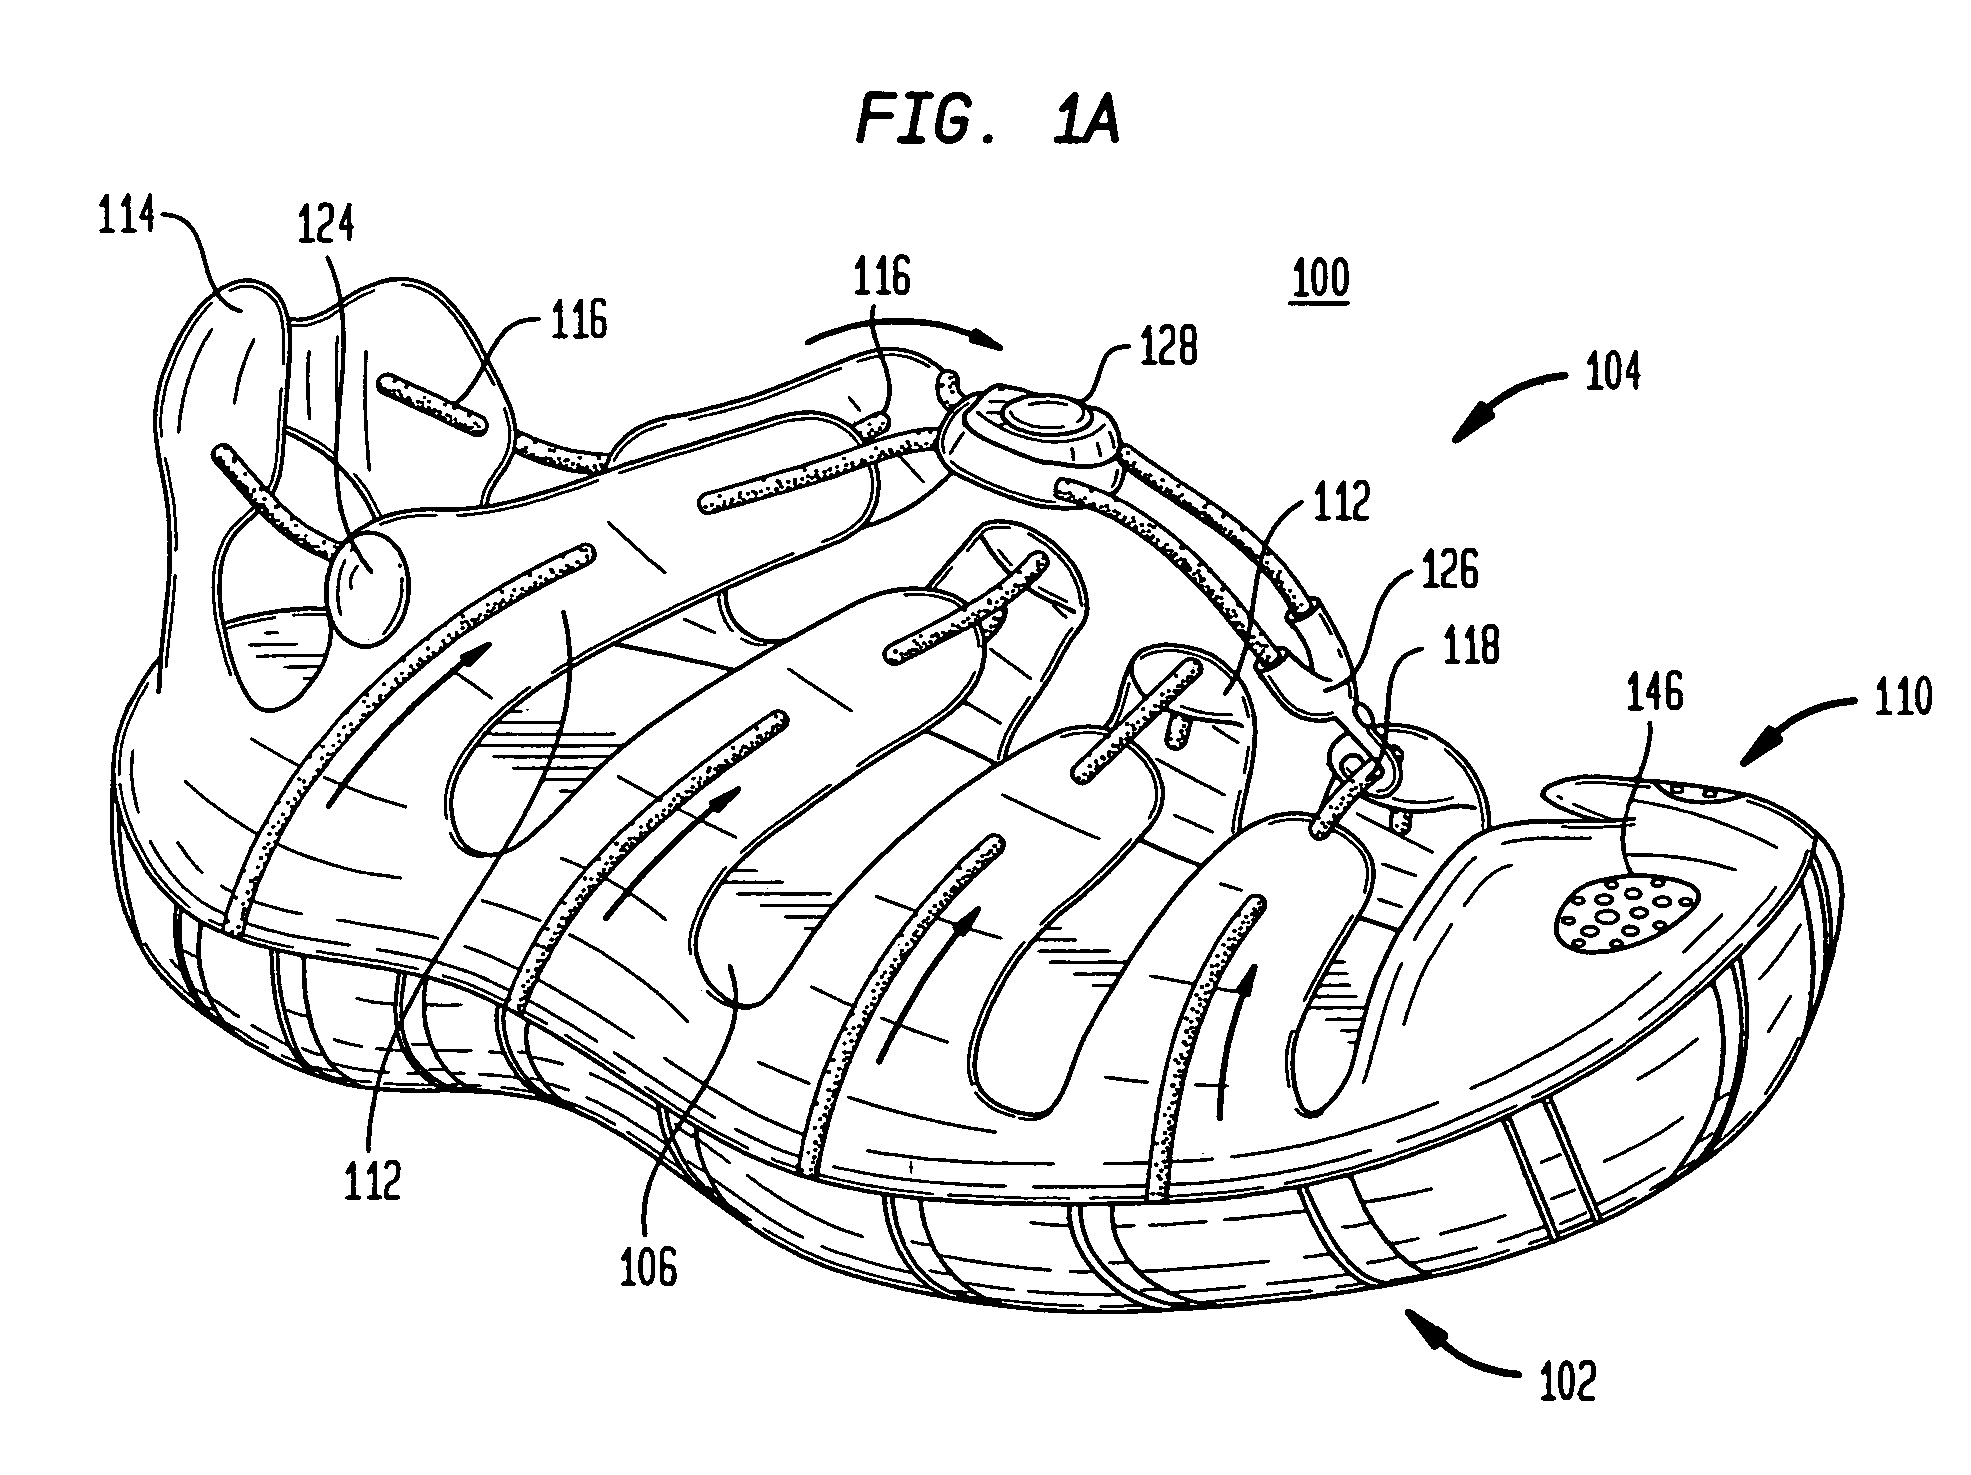 Shoe with lacing